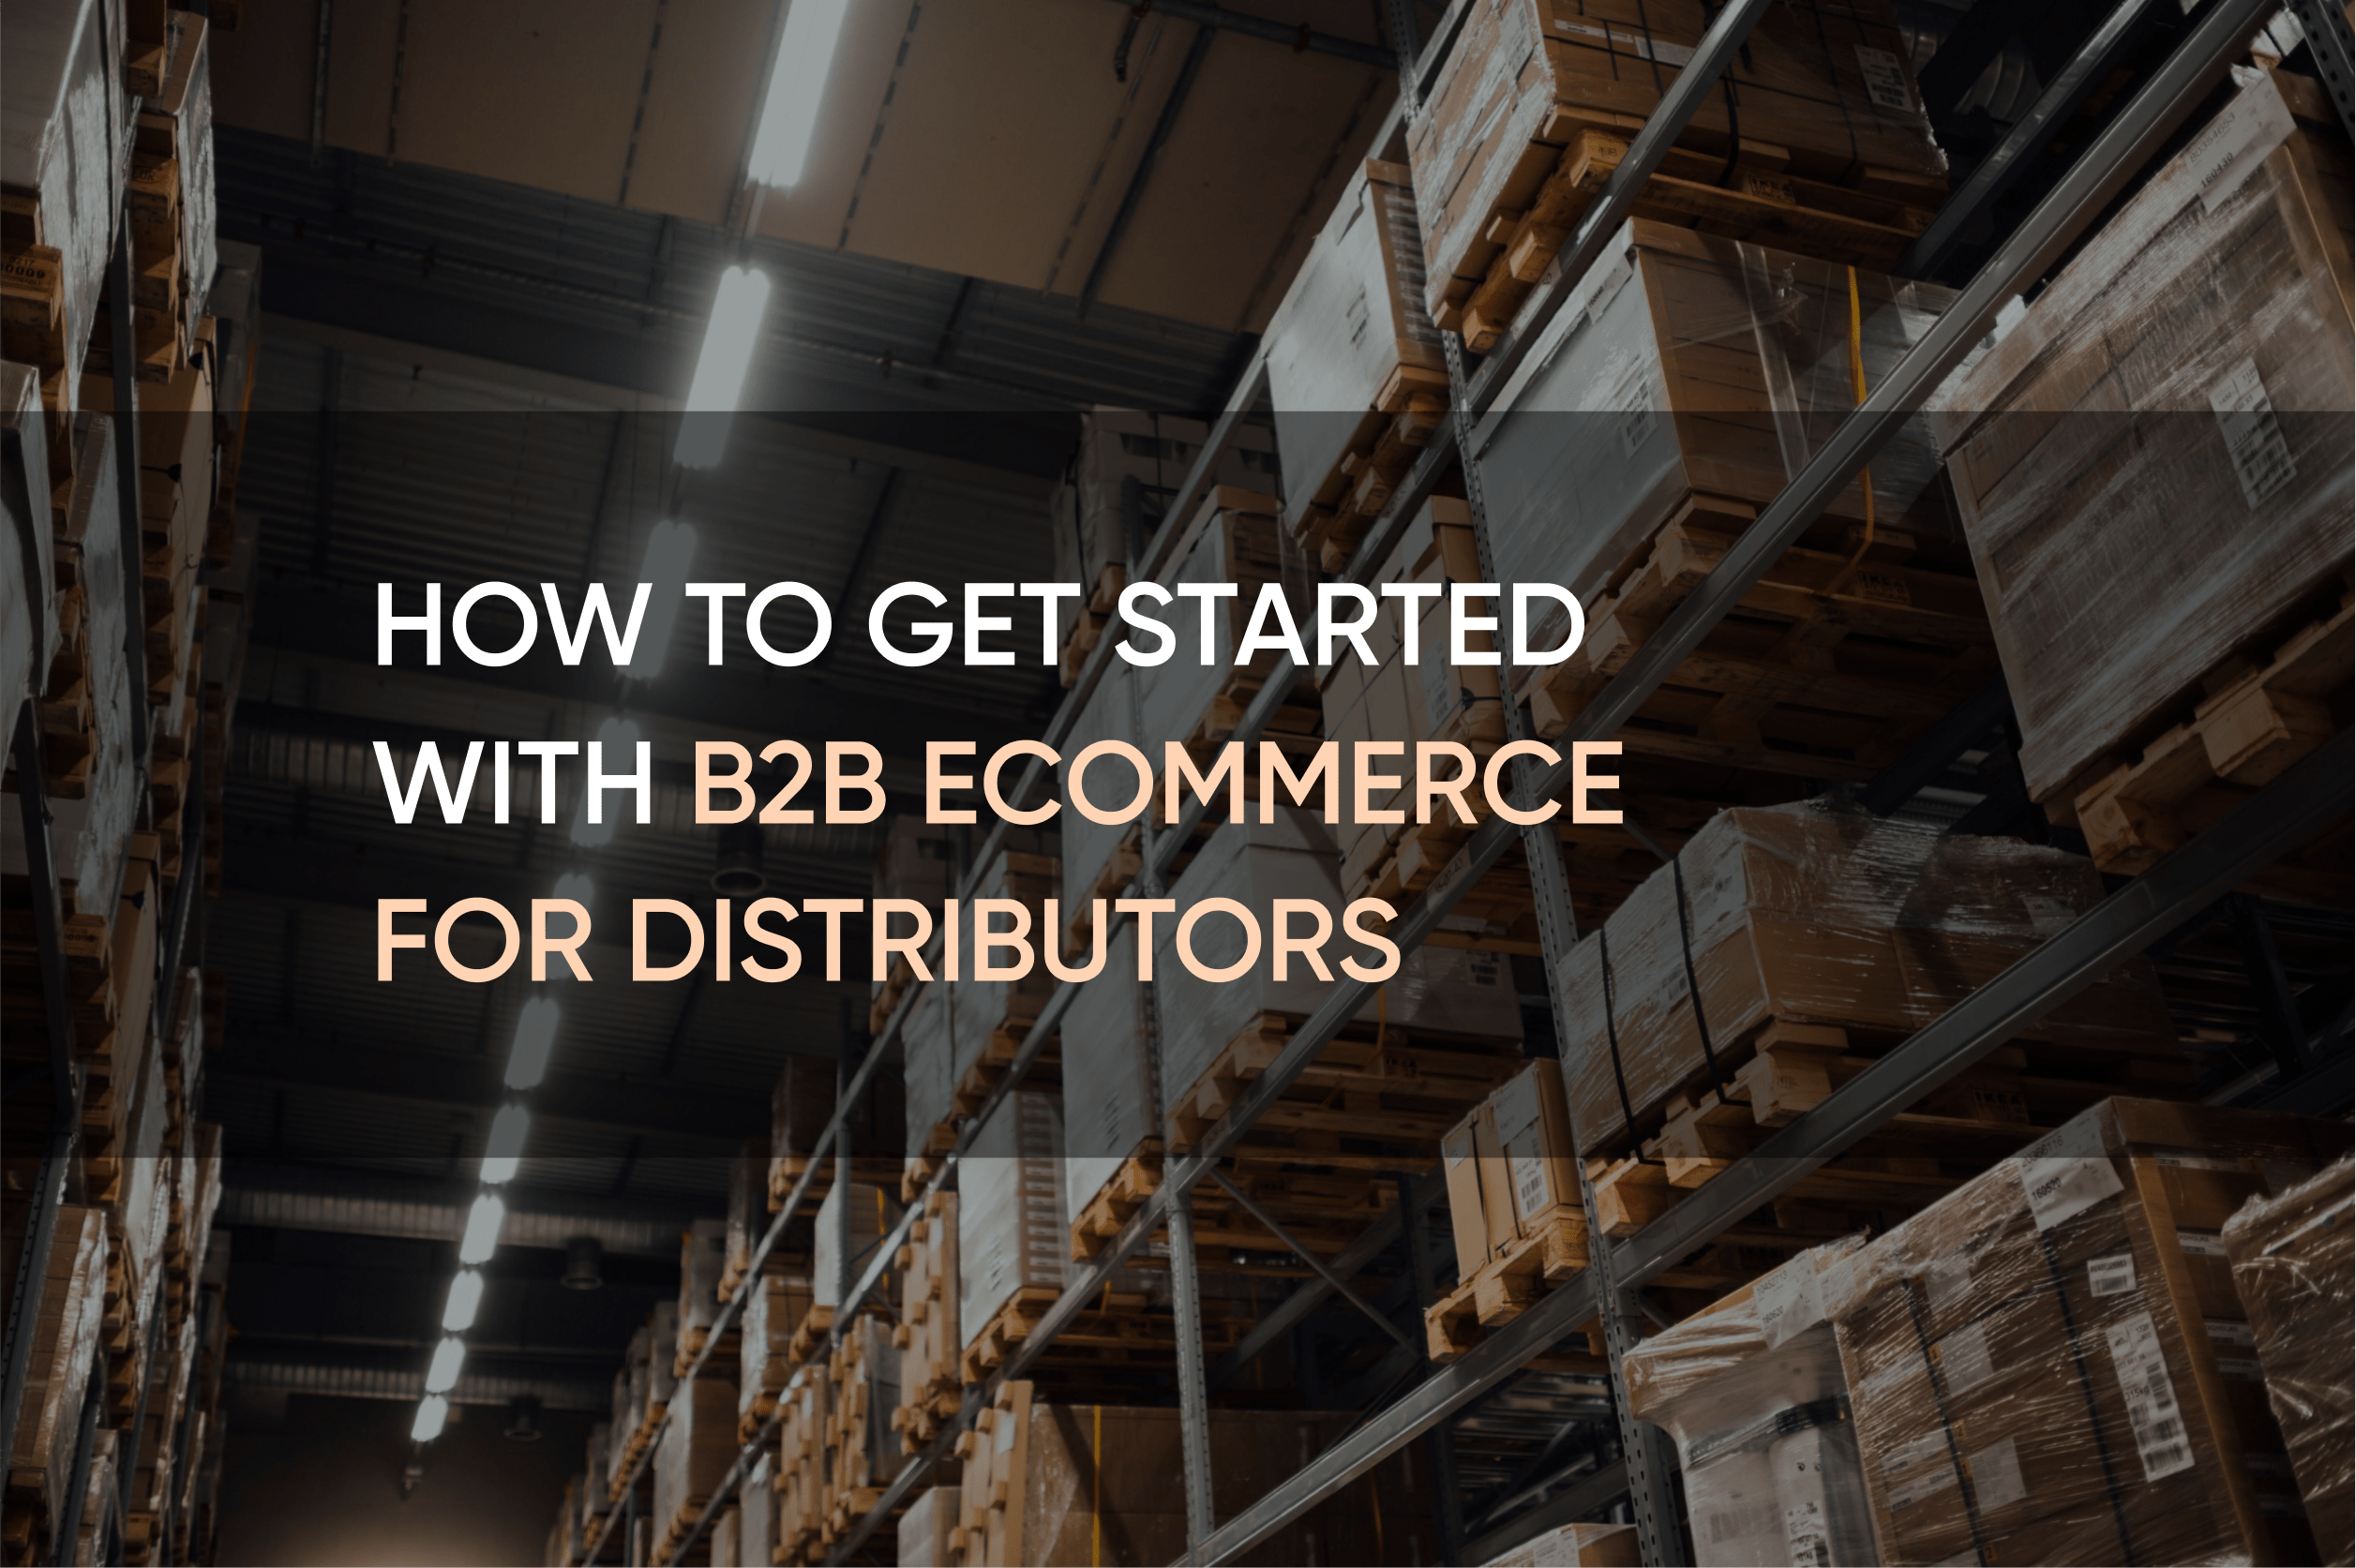 How to Get Started with B2B eCommerce for Distributors | SolidBrain